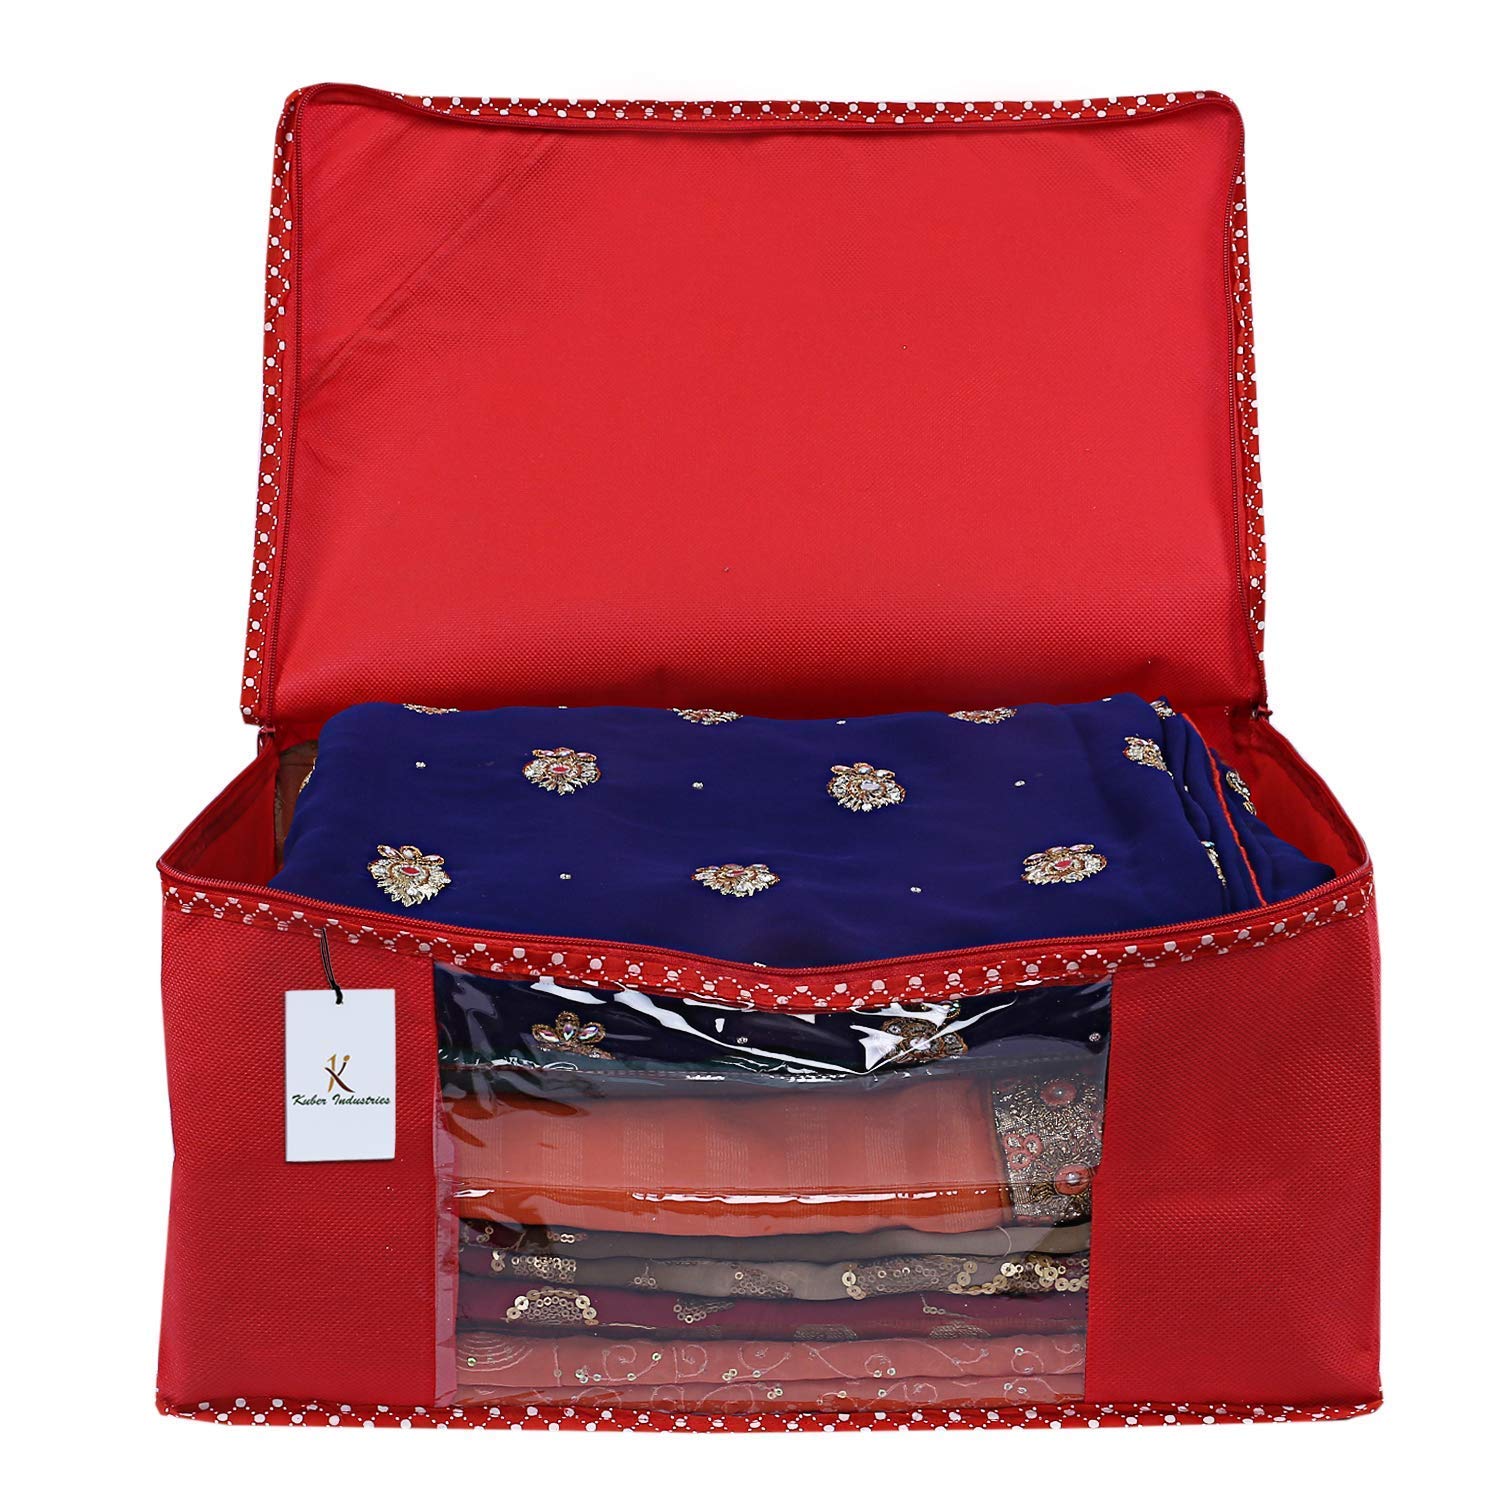 Kuber Industries 3 Piece Non Woven Fabric Saree Cover Set with Transparent Window, Extra Large, Red-CTKTC31880